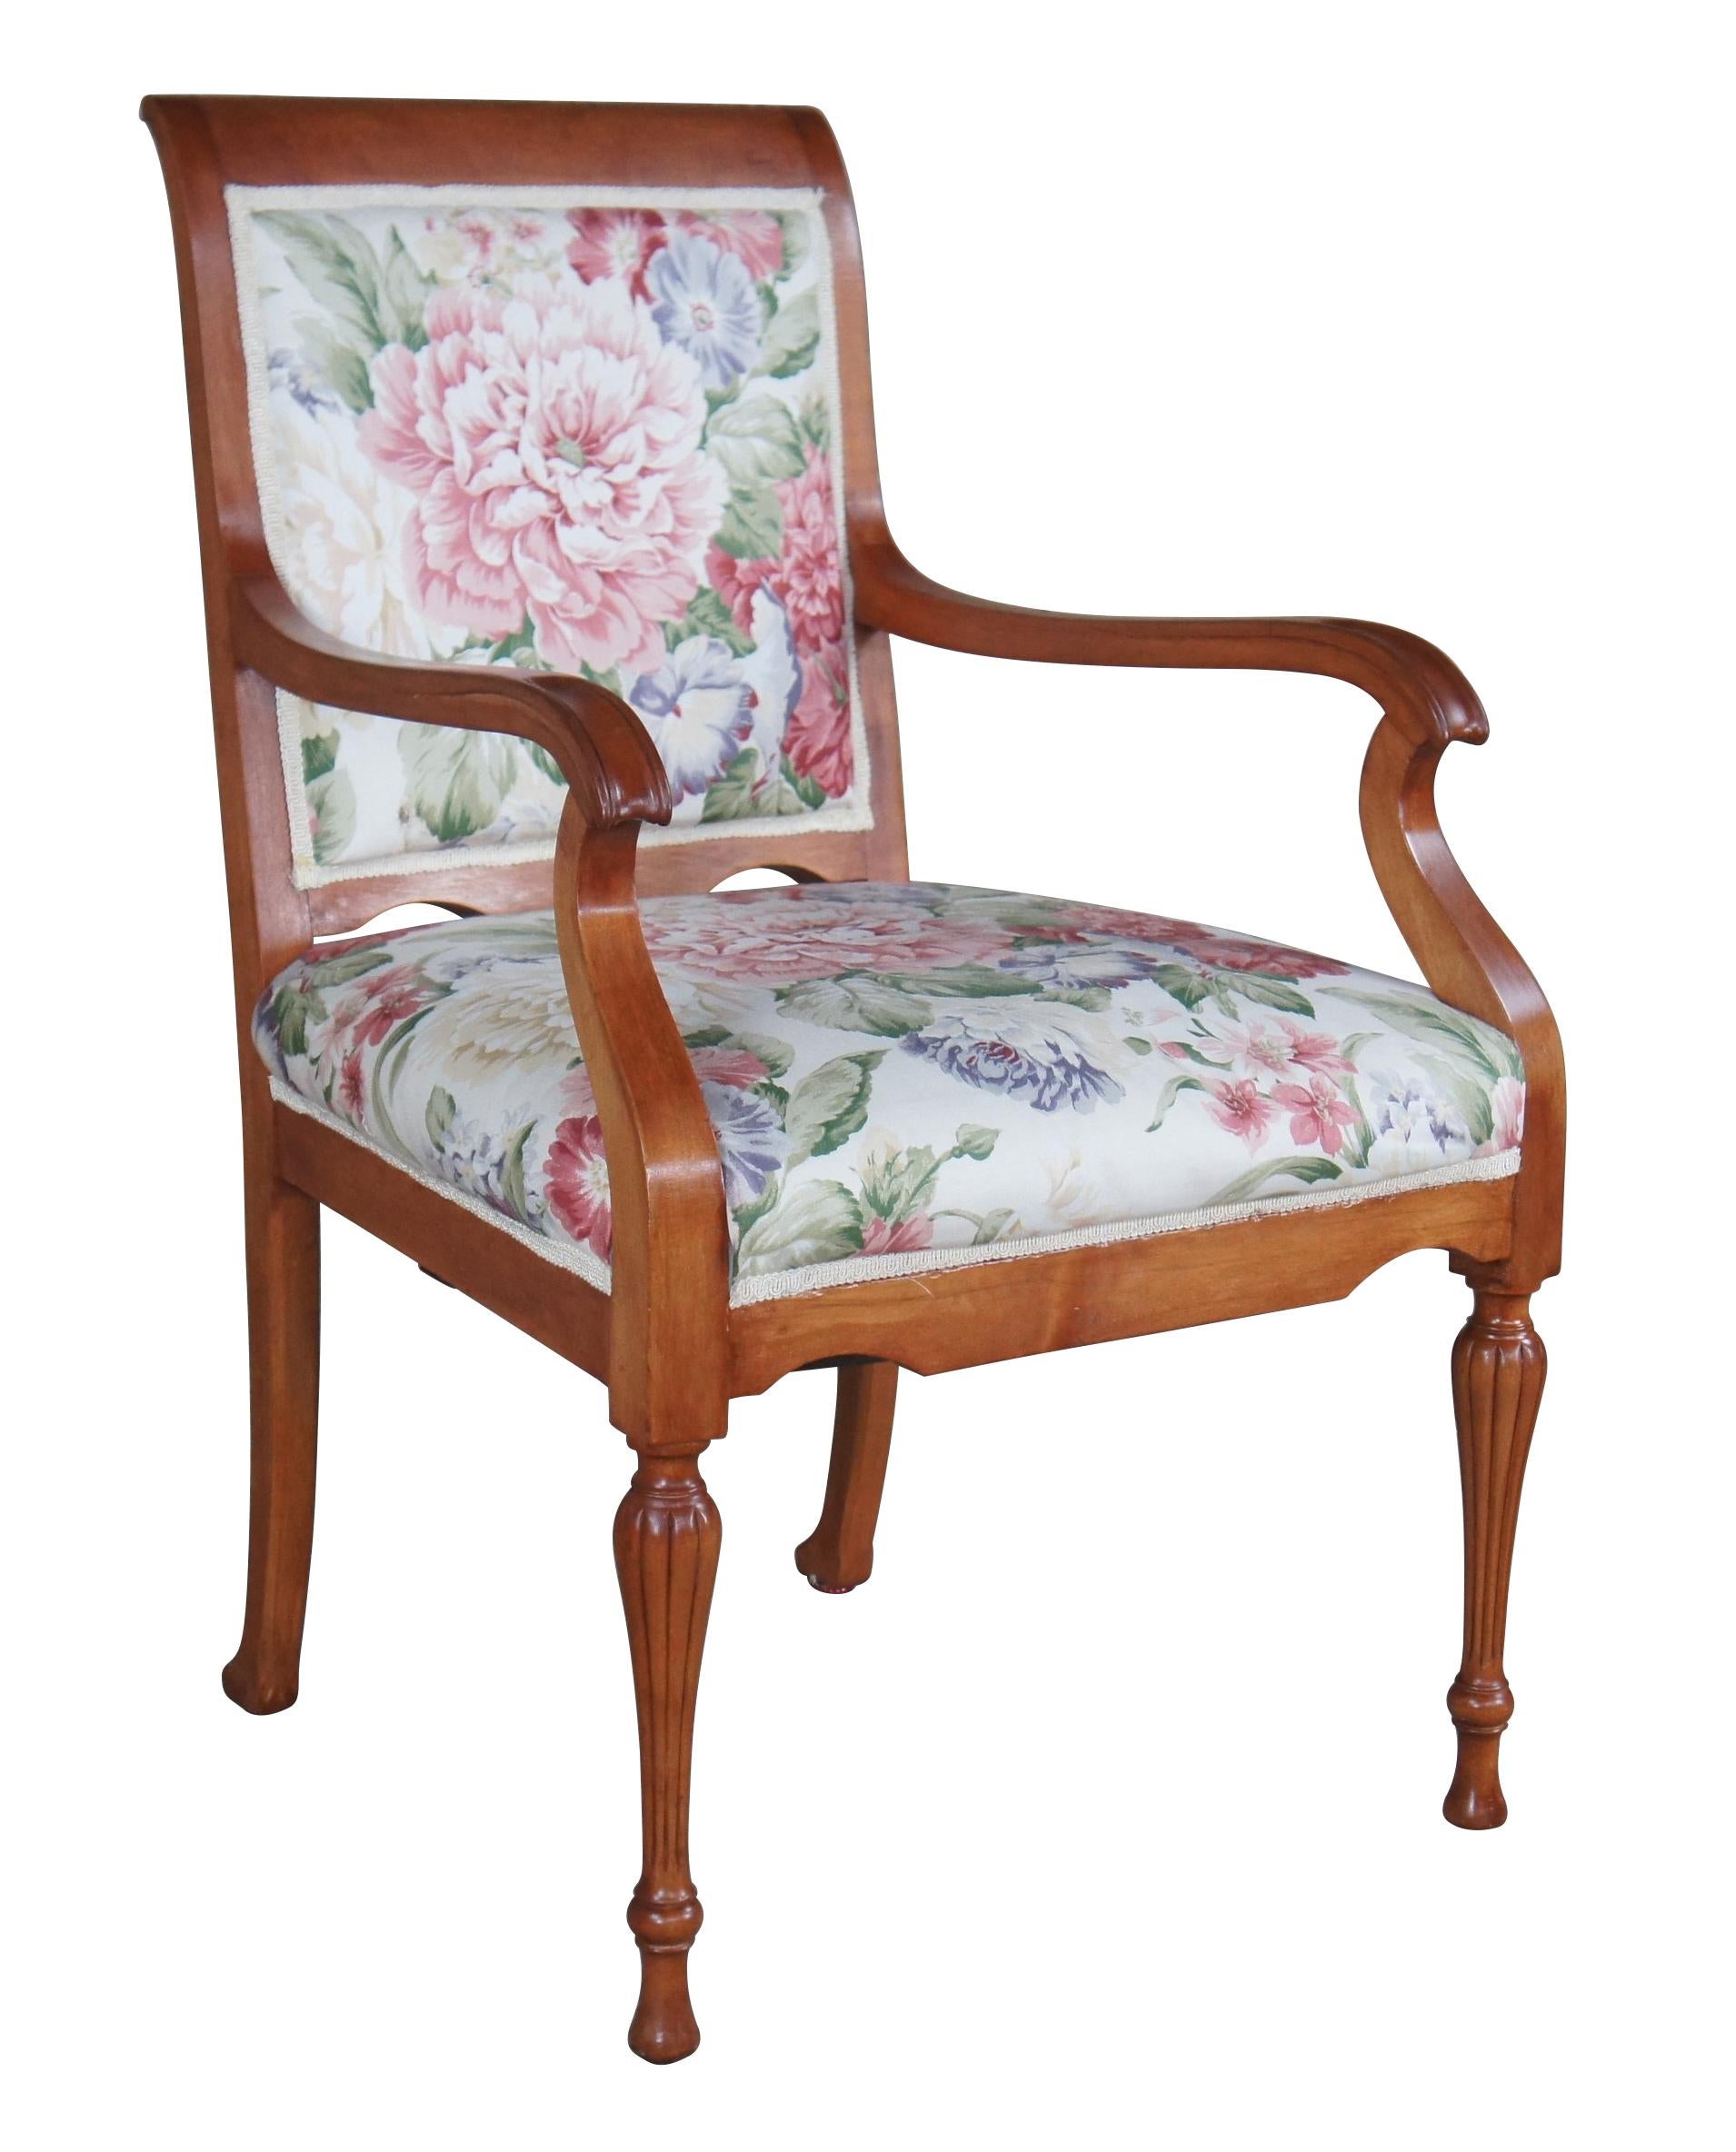 20th Century Mid Century French Provincial Mahogany Floral Upholstered Twin Beds & Arm Chair  For Sale